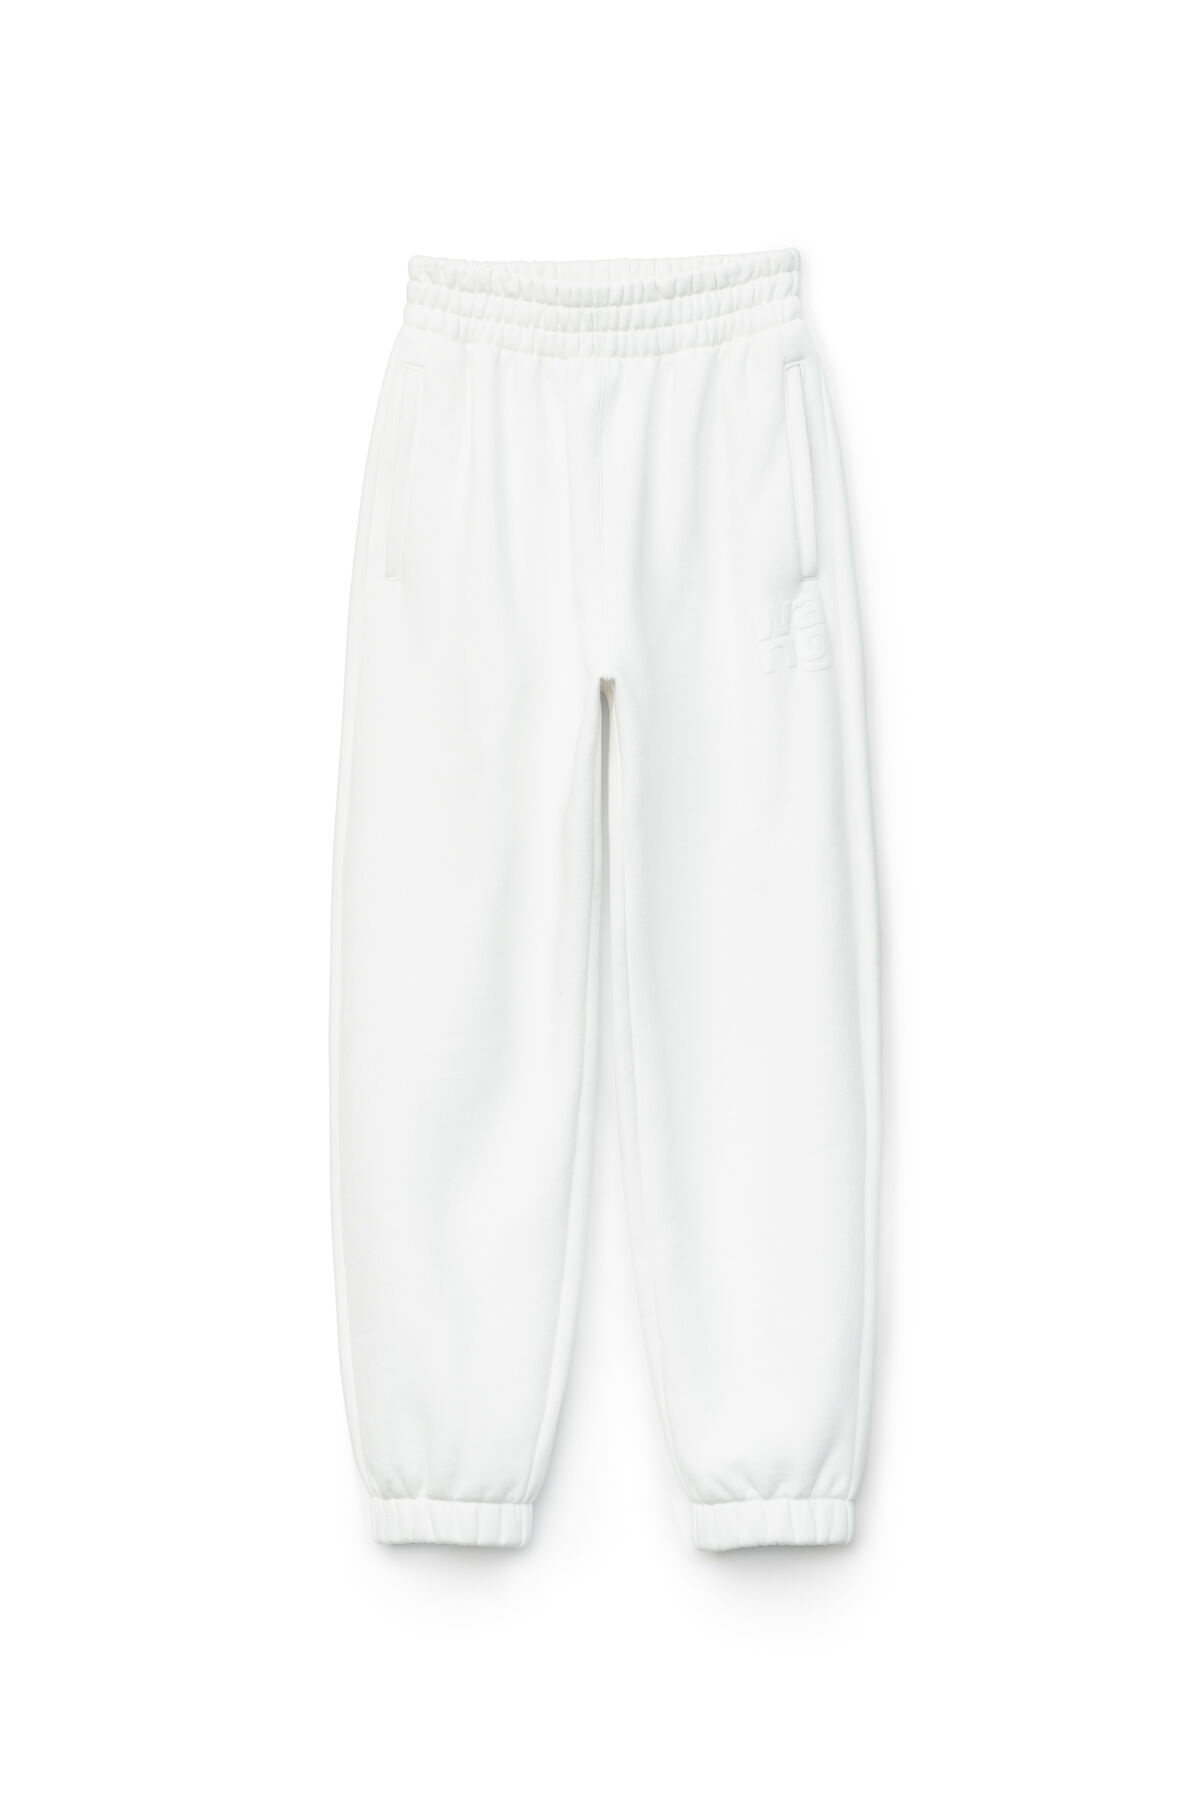 FOUNDATION TERRY SWEATPANT by Alexander Wang, available on alexanderwang.com for $180 Kylie Jenner Pants SIMILAR PRODUCT